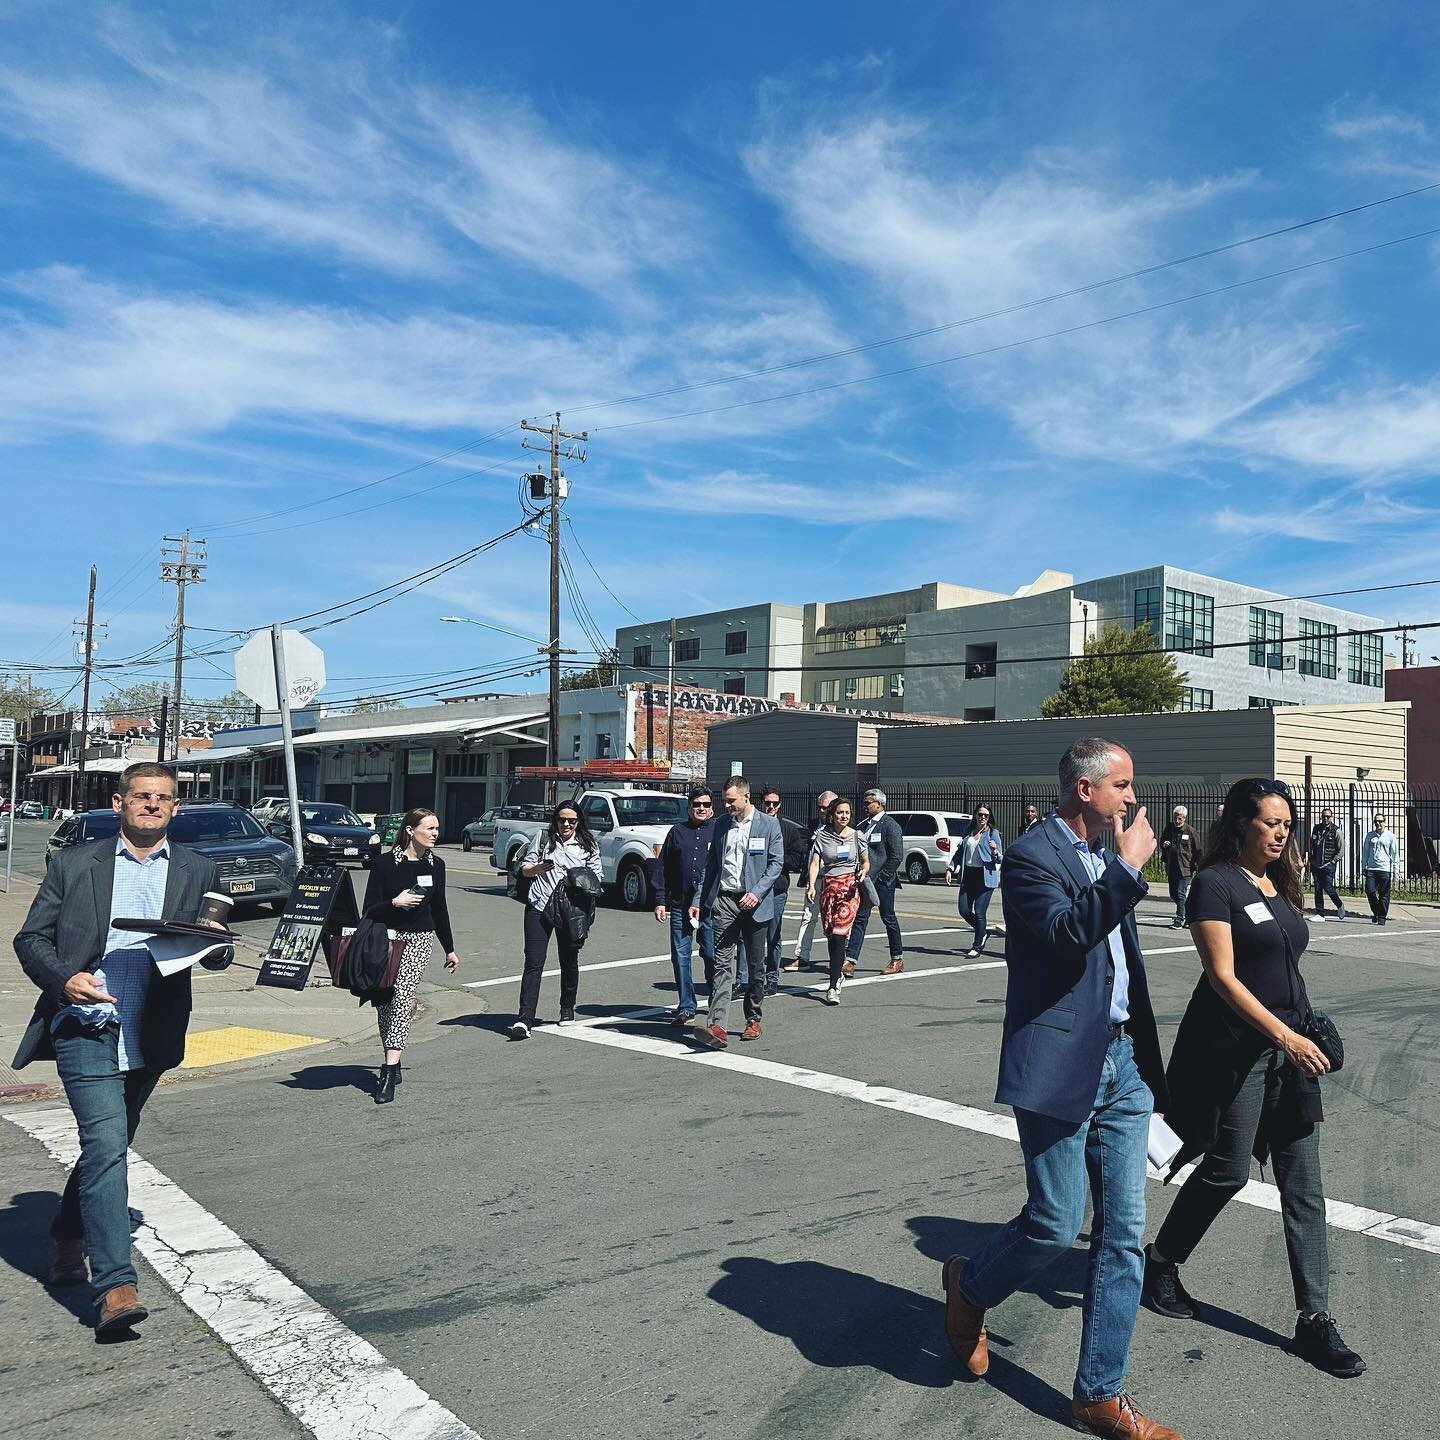 Last Friday we had the pleasure of welcoming members of @ulisf on a walking tour of our district. Developers from all over the Bay Area gathered to visit several sites that will be home to major residential developments, including hundreds of units o